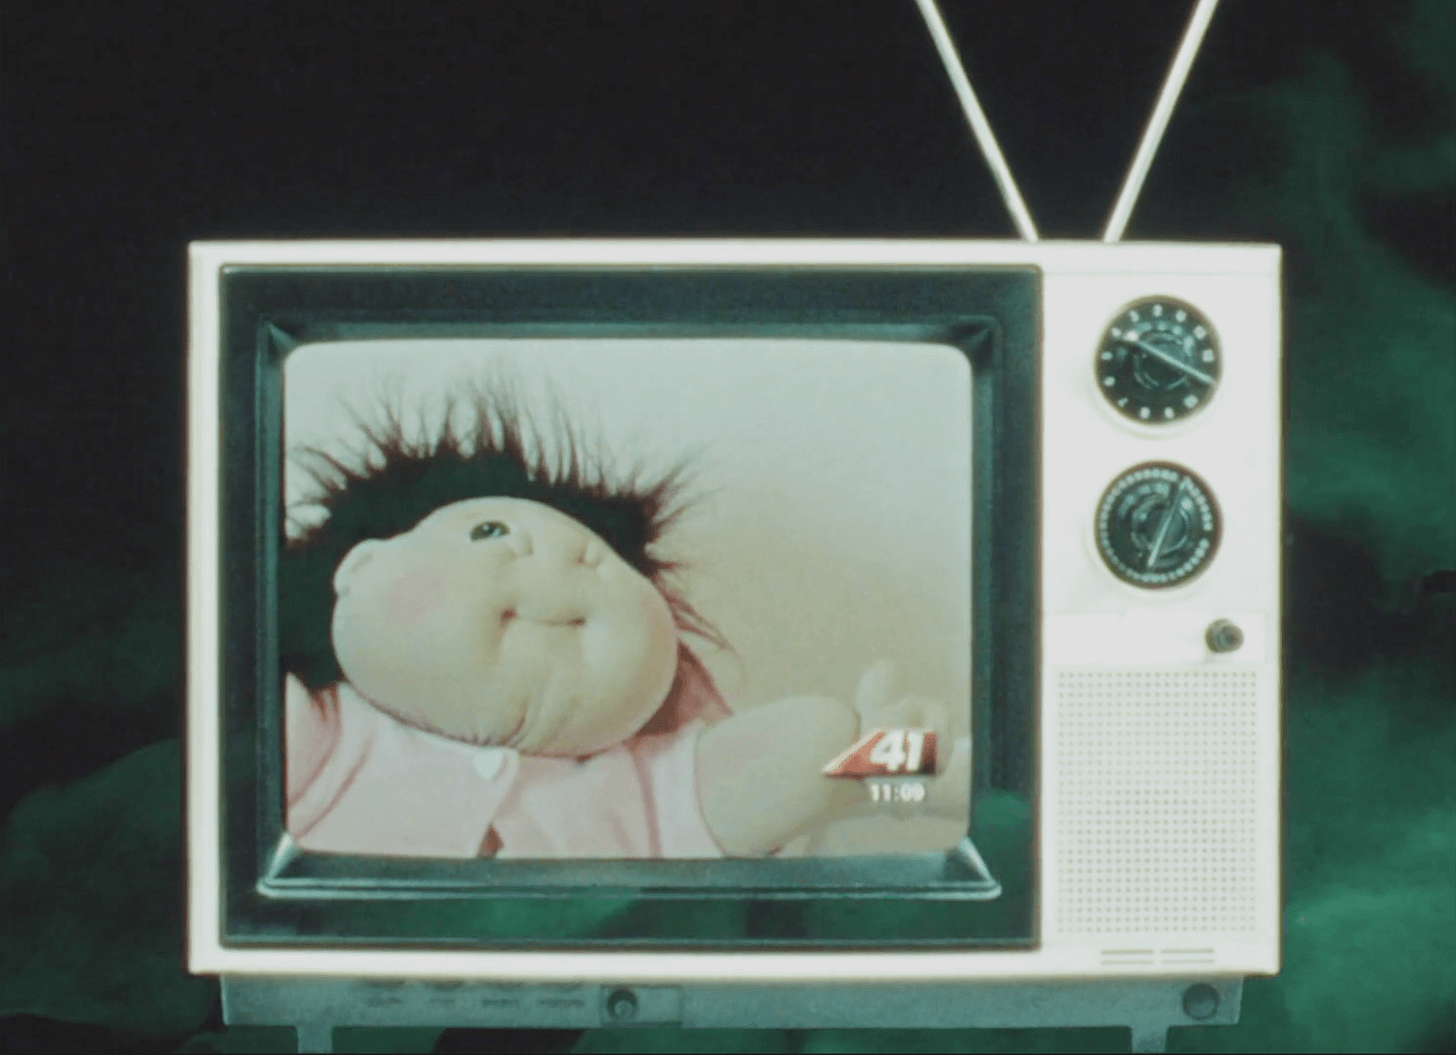 A TV shows a commercial for Cabbage Patch Kids dolls.